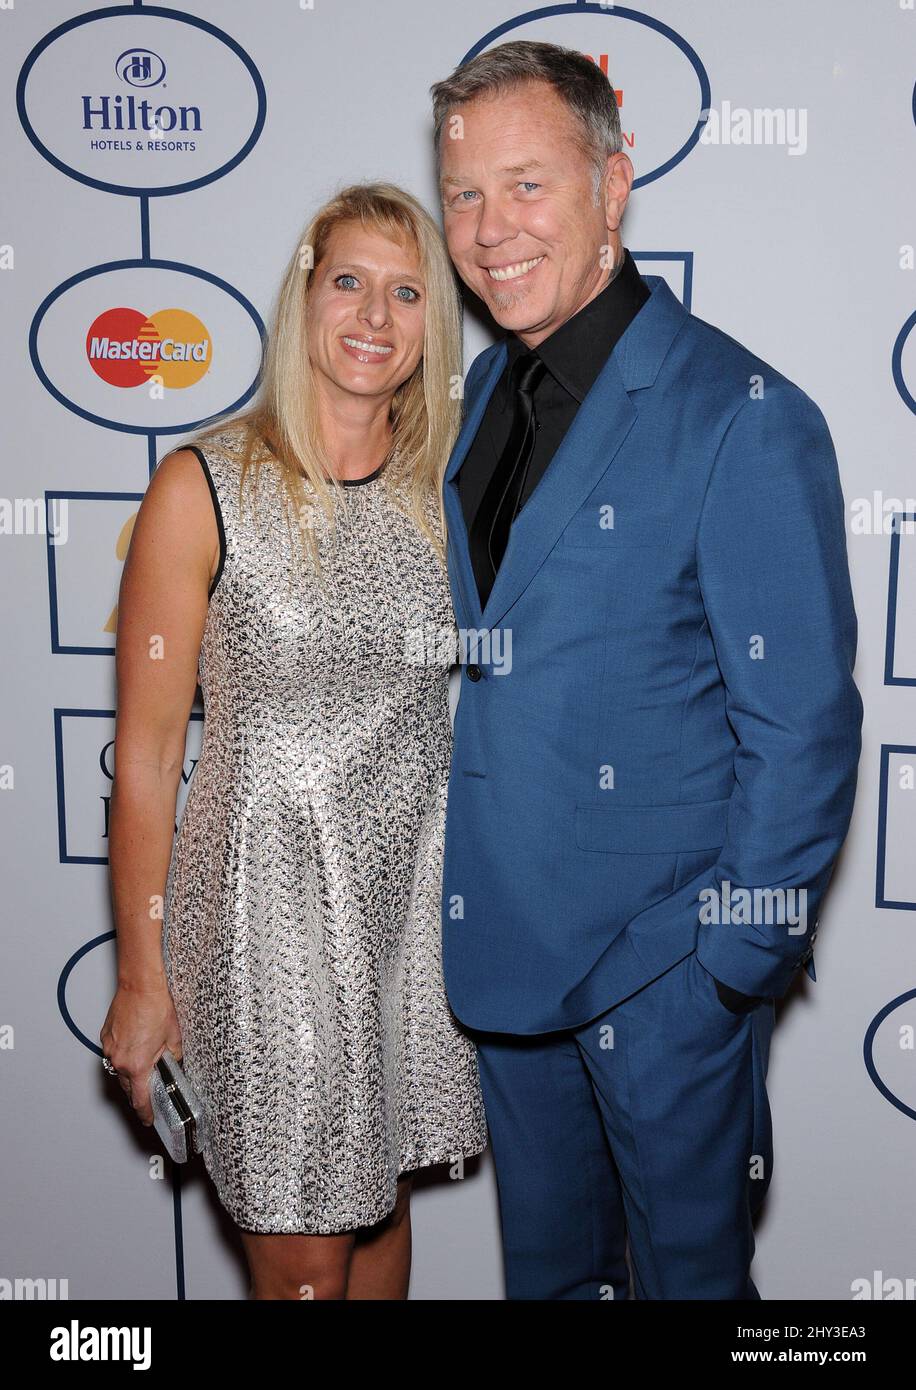 James Hetfield & Francesca Hetfield attending the Clive Davis Annual Pre-Grammy Party 2014 at the Hilton in Los Angeles, California. Stock Photo